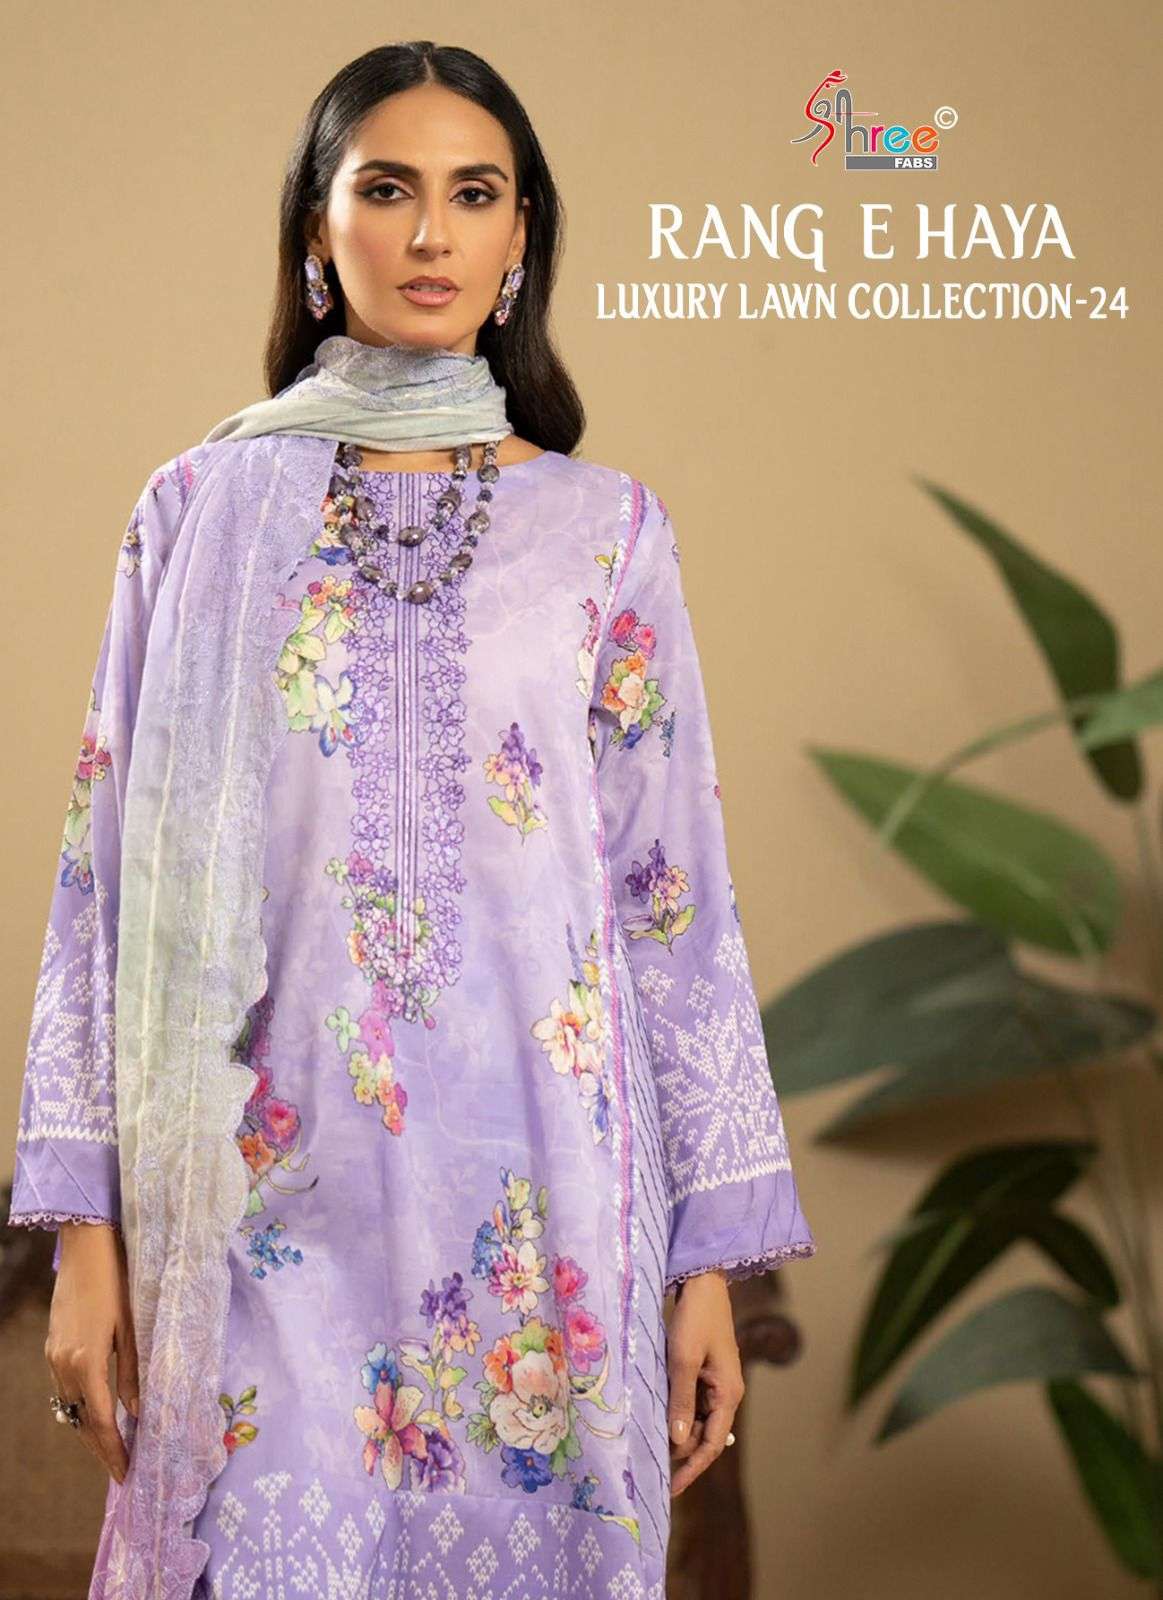 Shree Fabs Rang E Haya Luxury Lawn Collection 24 Pakistani Cotton Suit Dealers